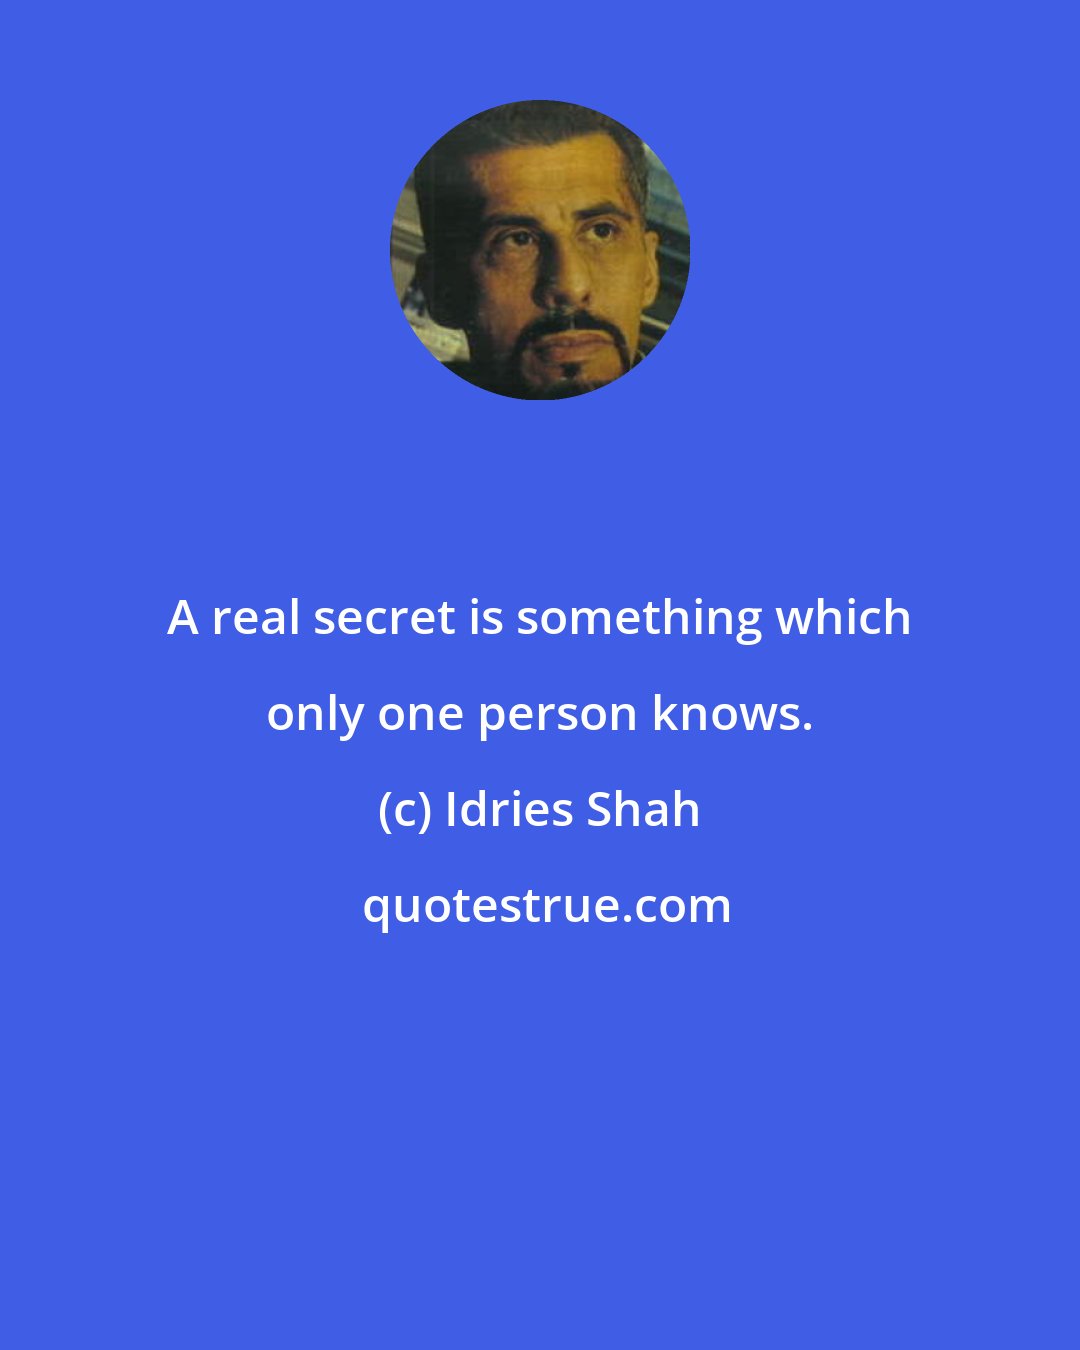 Idries Shah: A real secret is something which only one person knows.